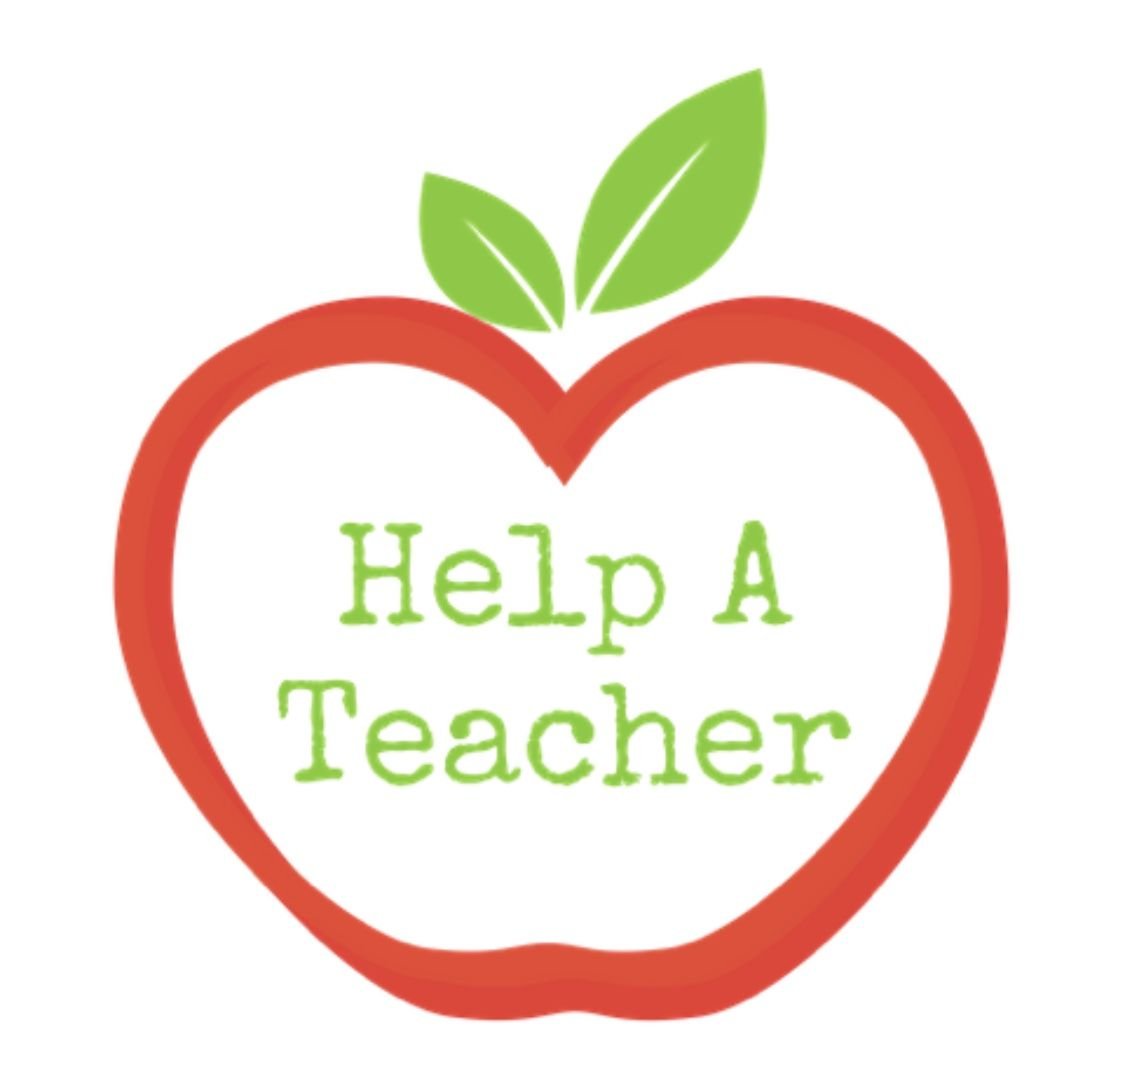 #TeacherAppreciationWeek has come & gone, But for Teacher Support it’s just the Dawn! #Teachers need more than “thanks”; they have classroom needs, And hope someone comes along who intercedes. Teachers, please post your list below. And hope that one of your items will go!